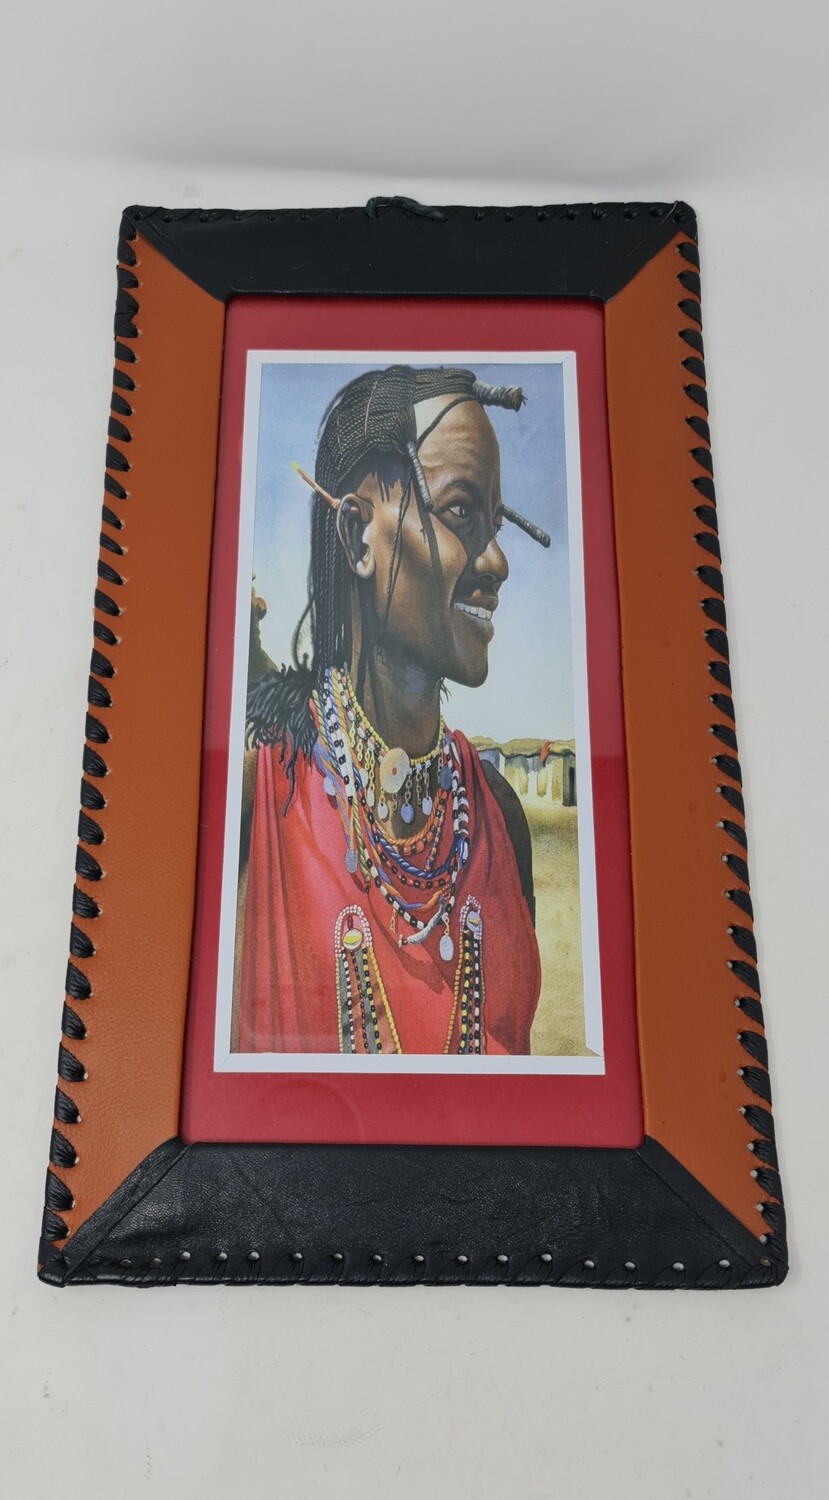 Hand Painted African Art Framed in Leather - Masai Warrior